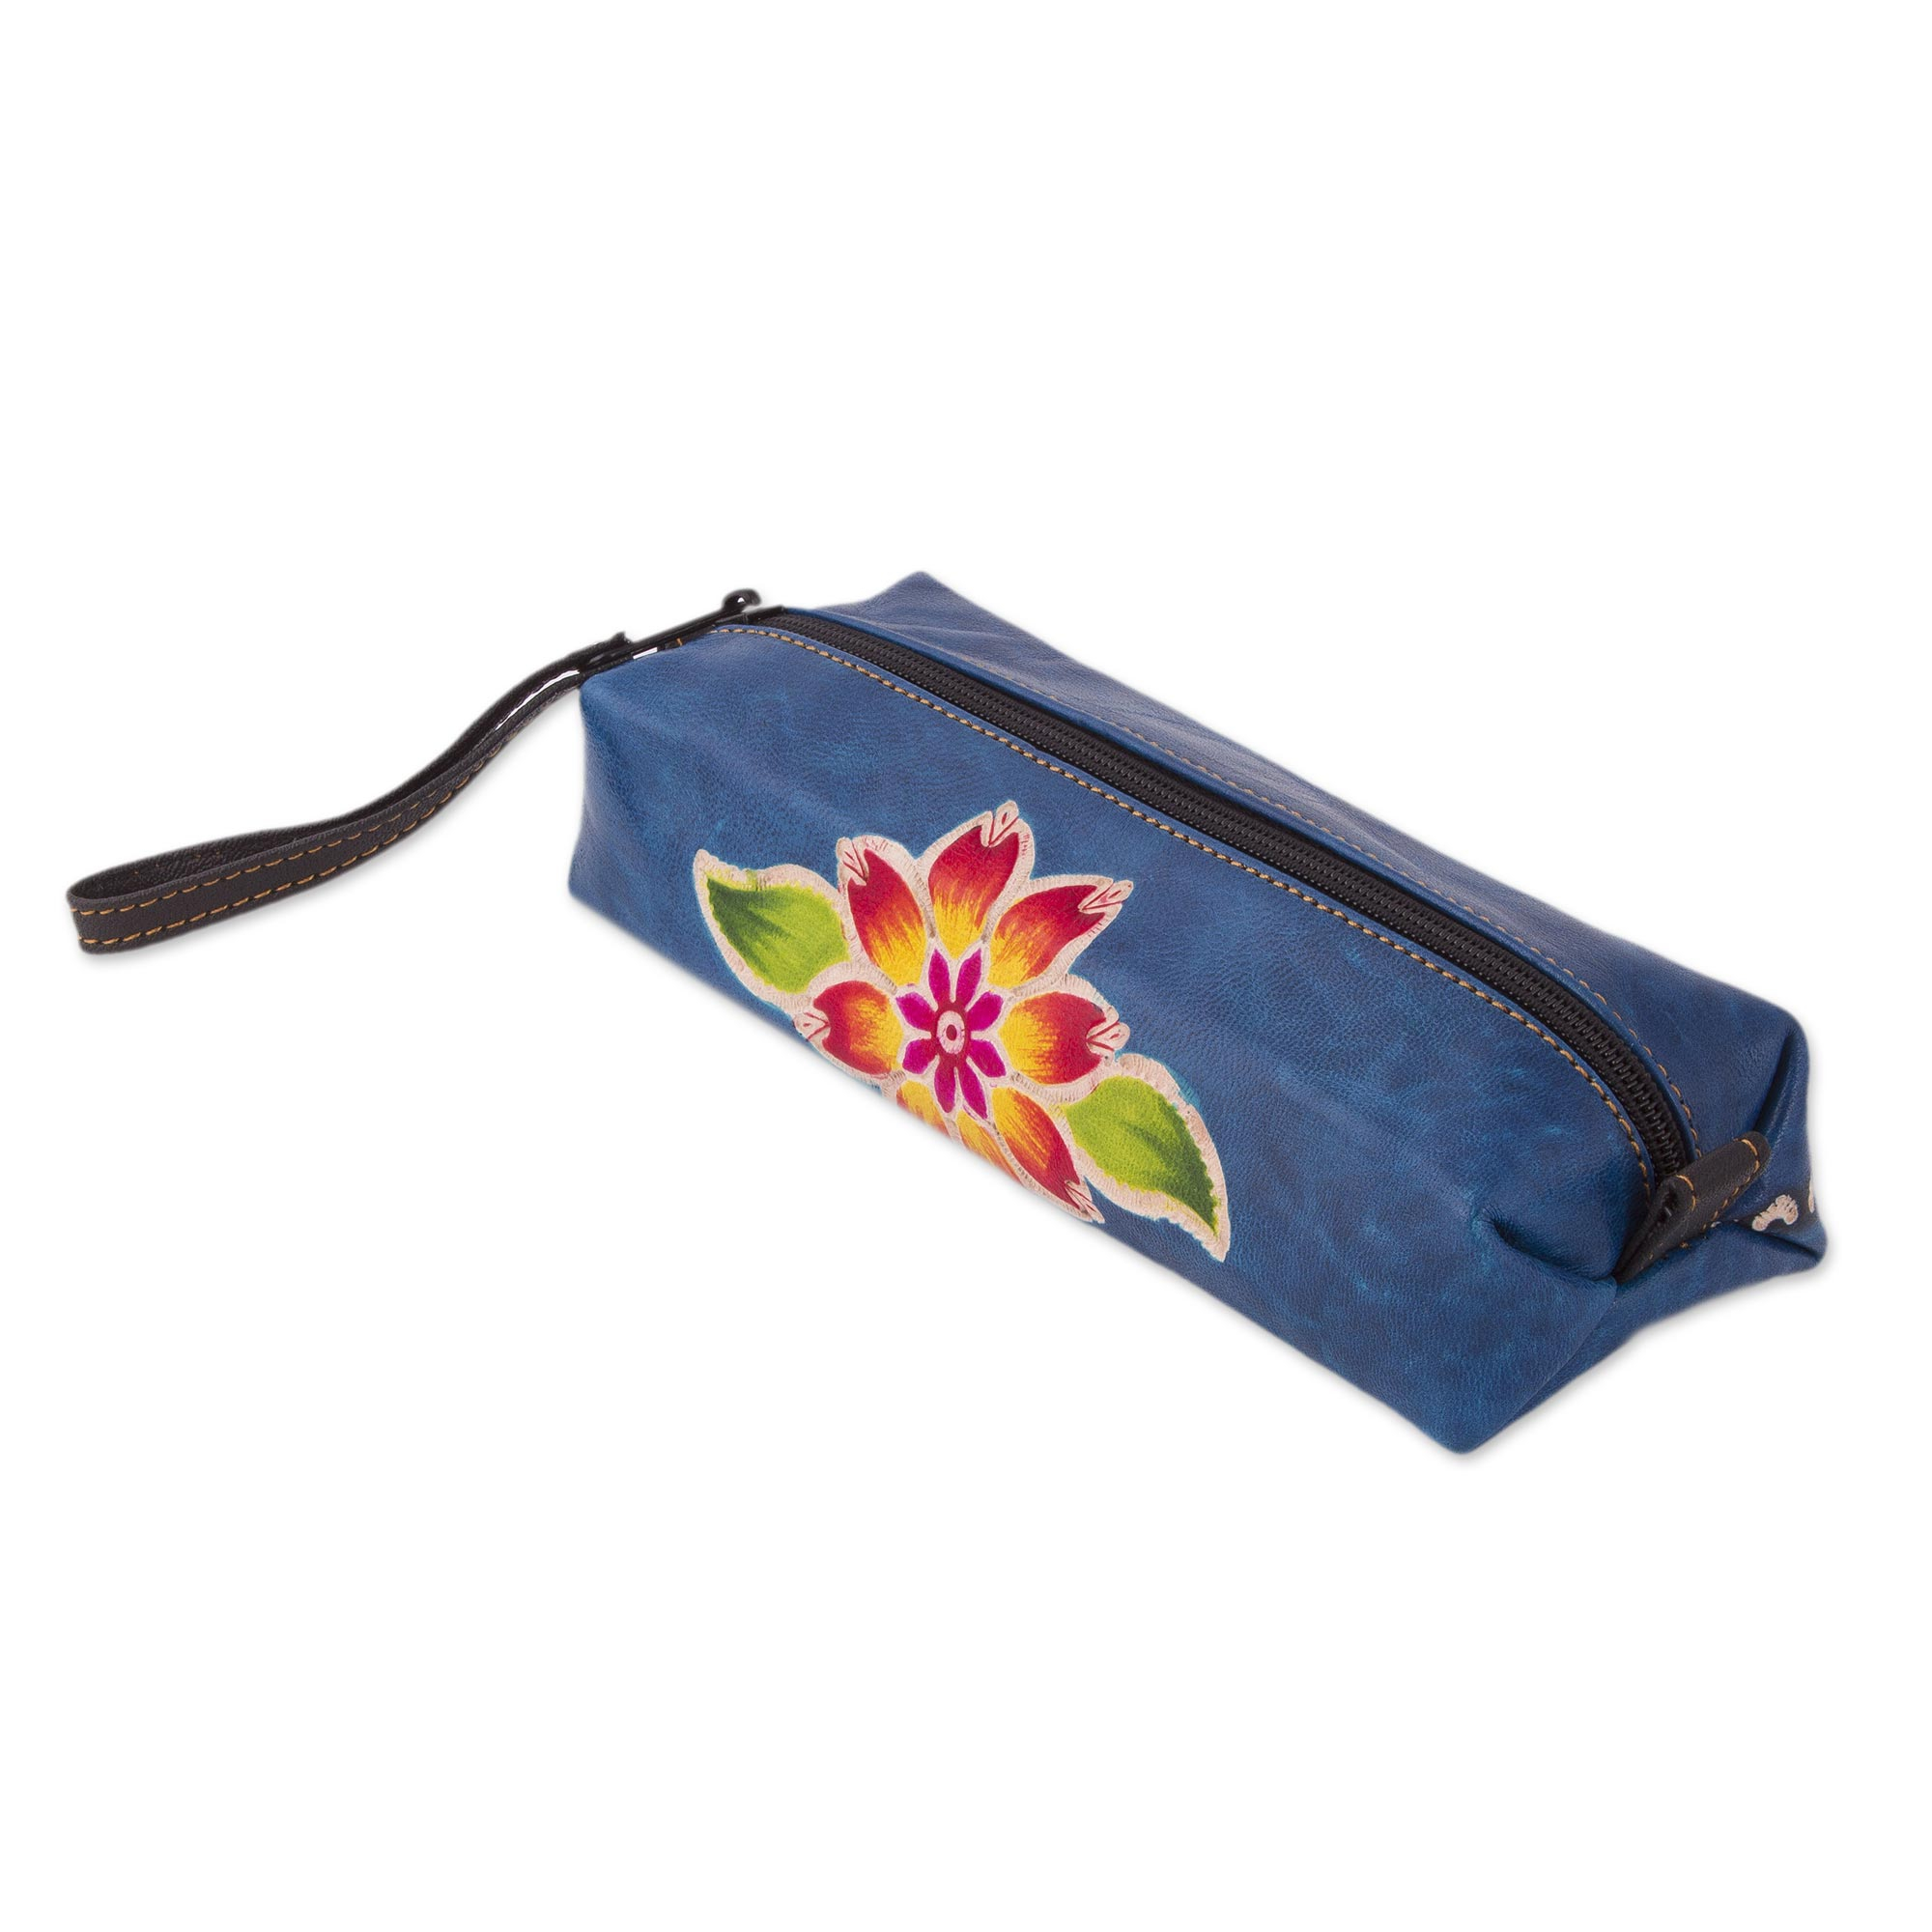 Under One Sky Case Cosmetic Bags